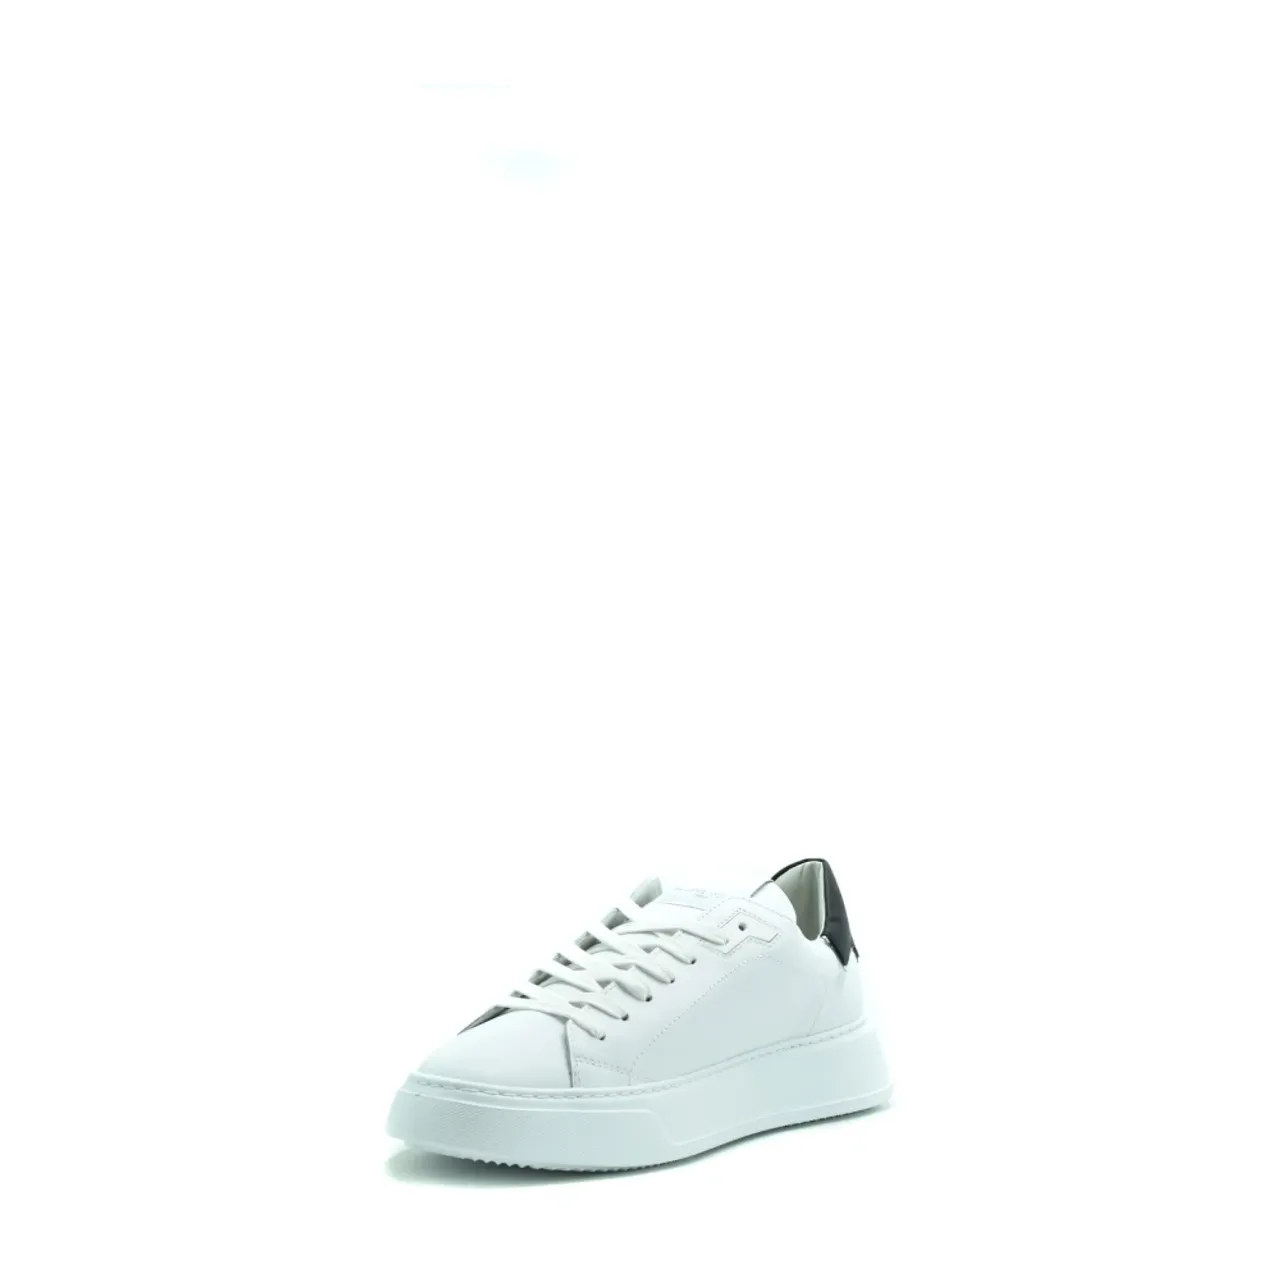 Philippe Model , Men's Shoes Sneakers White Aw23 ,White male, Sizes: